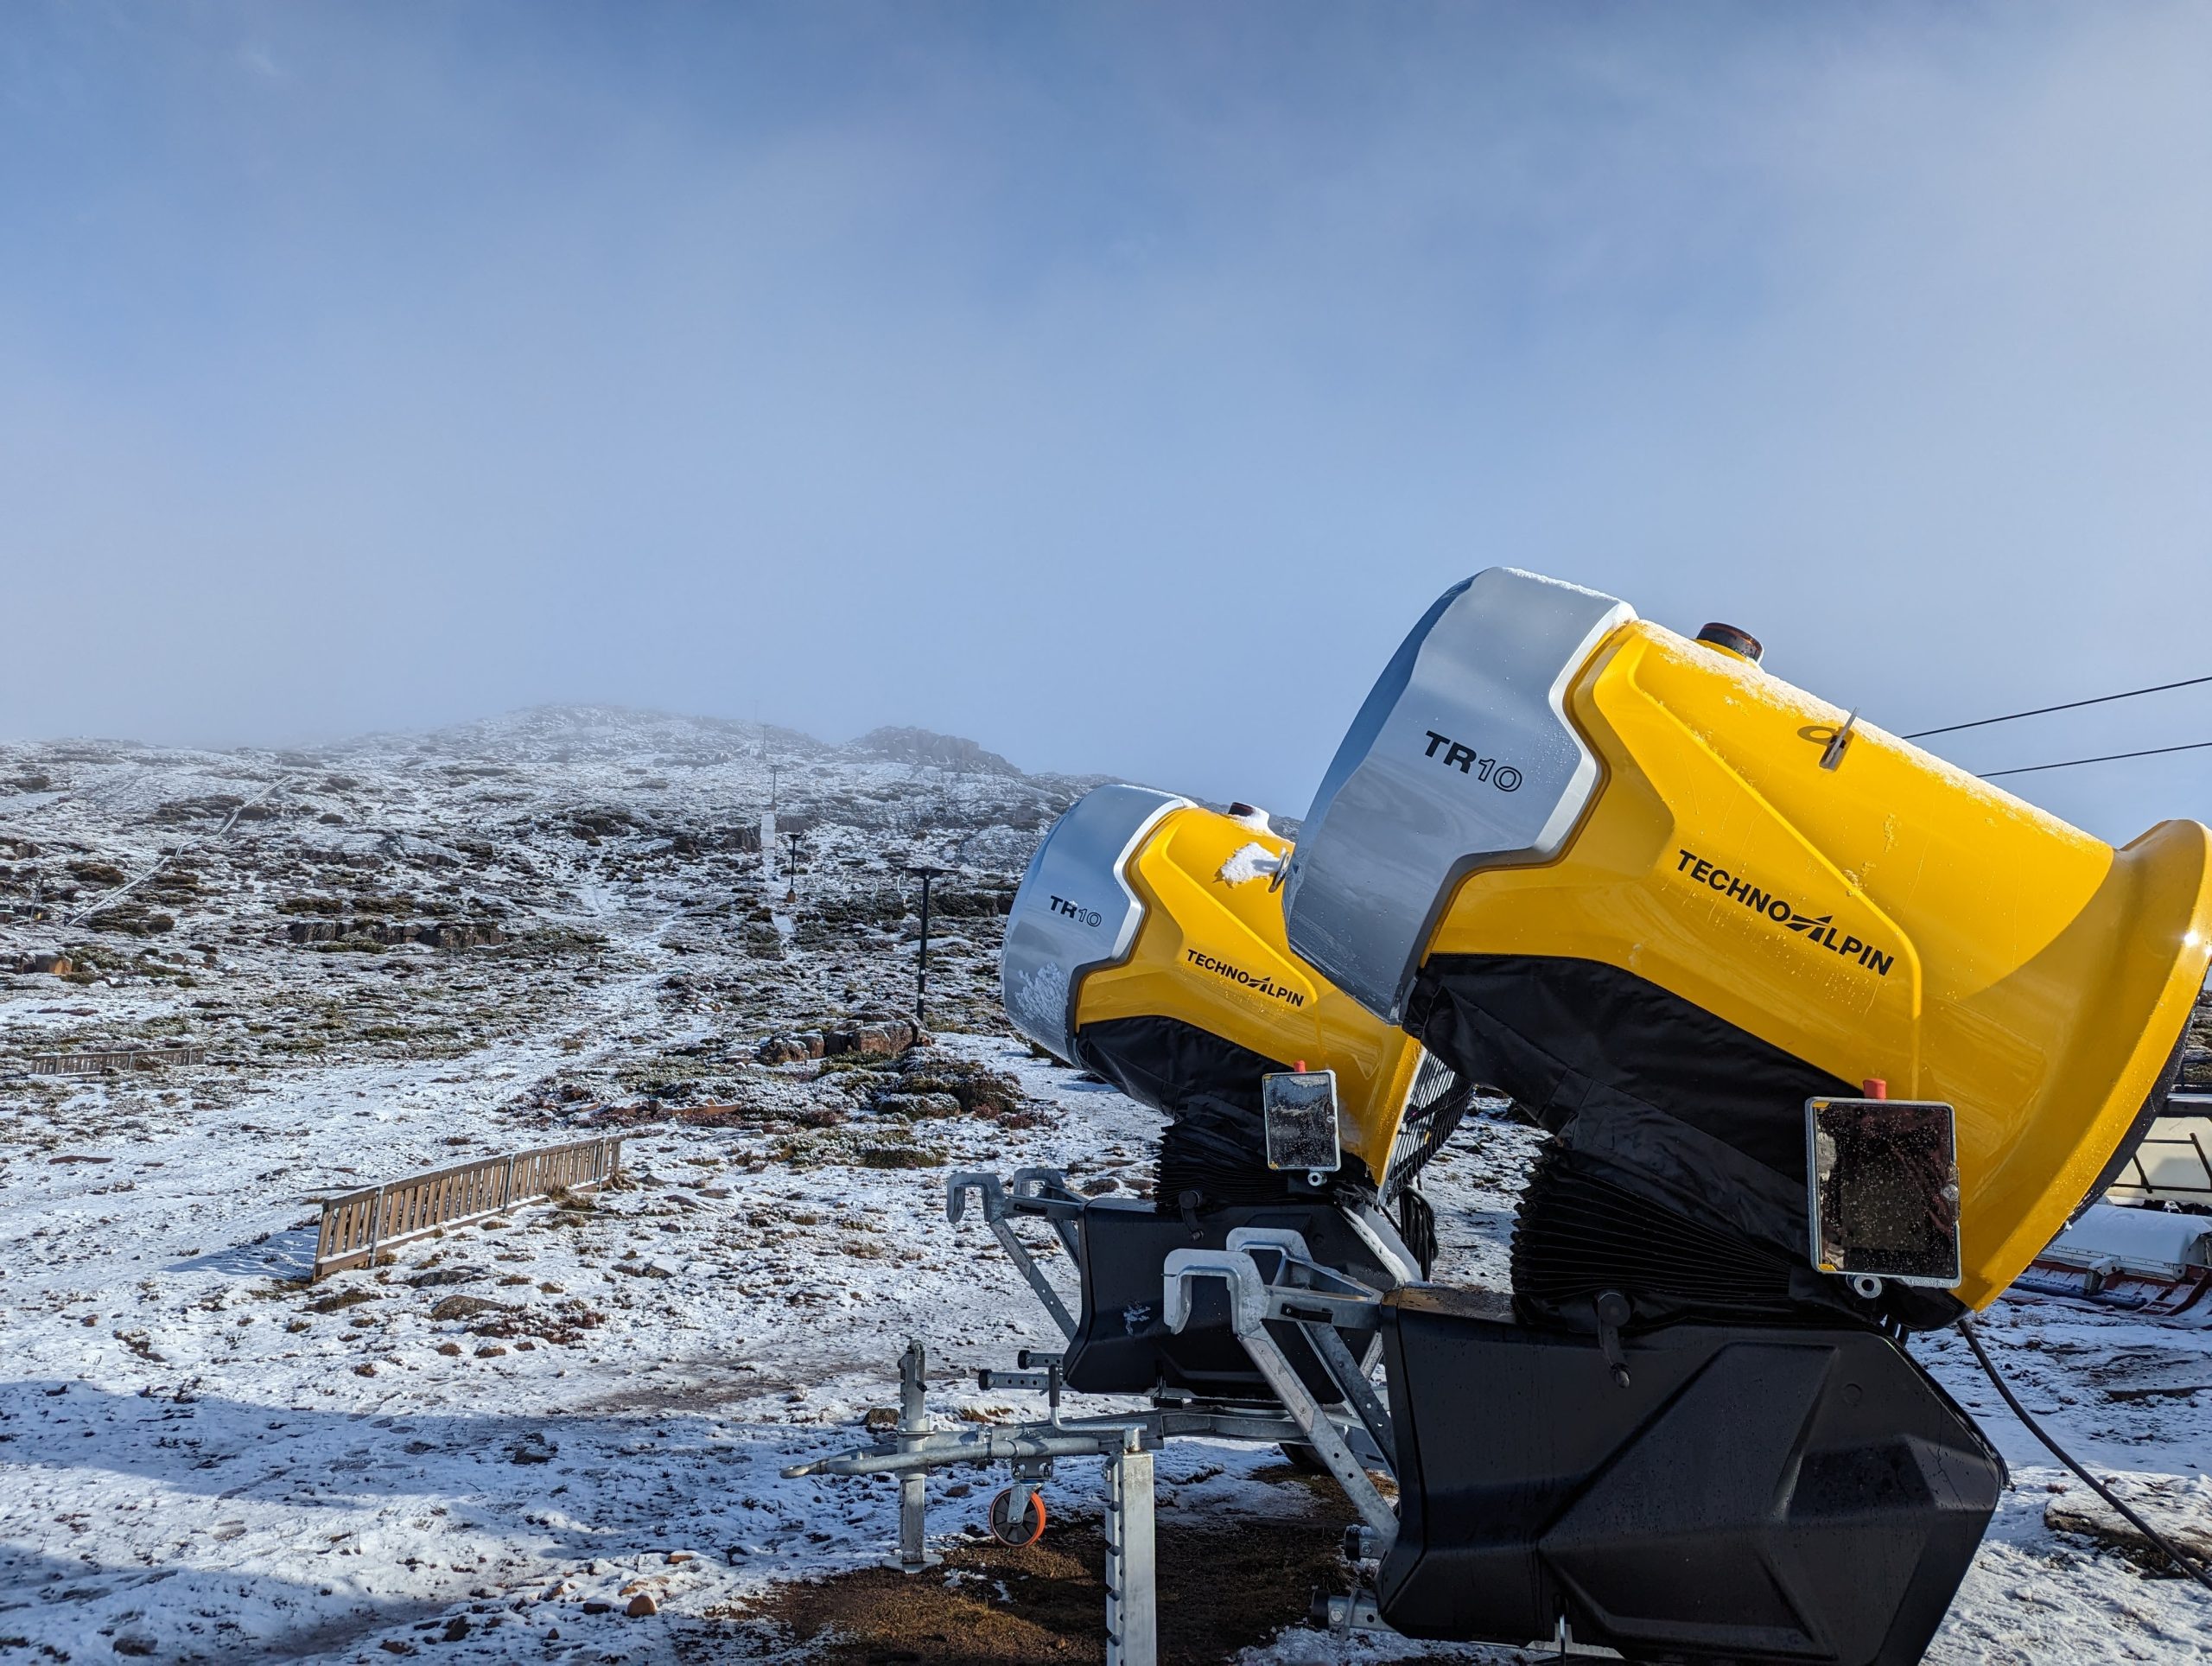 Snow machines will dramatically improve skiing and snowboarding at Ben Lomond